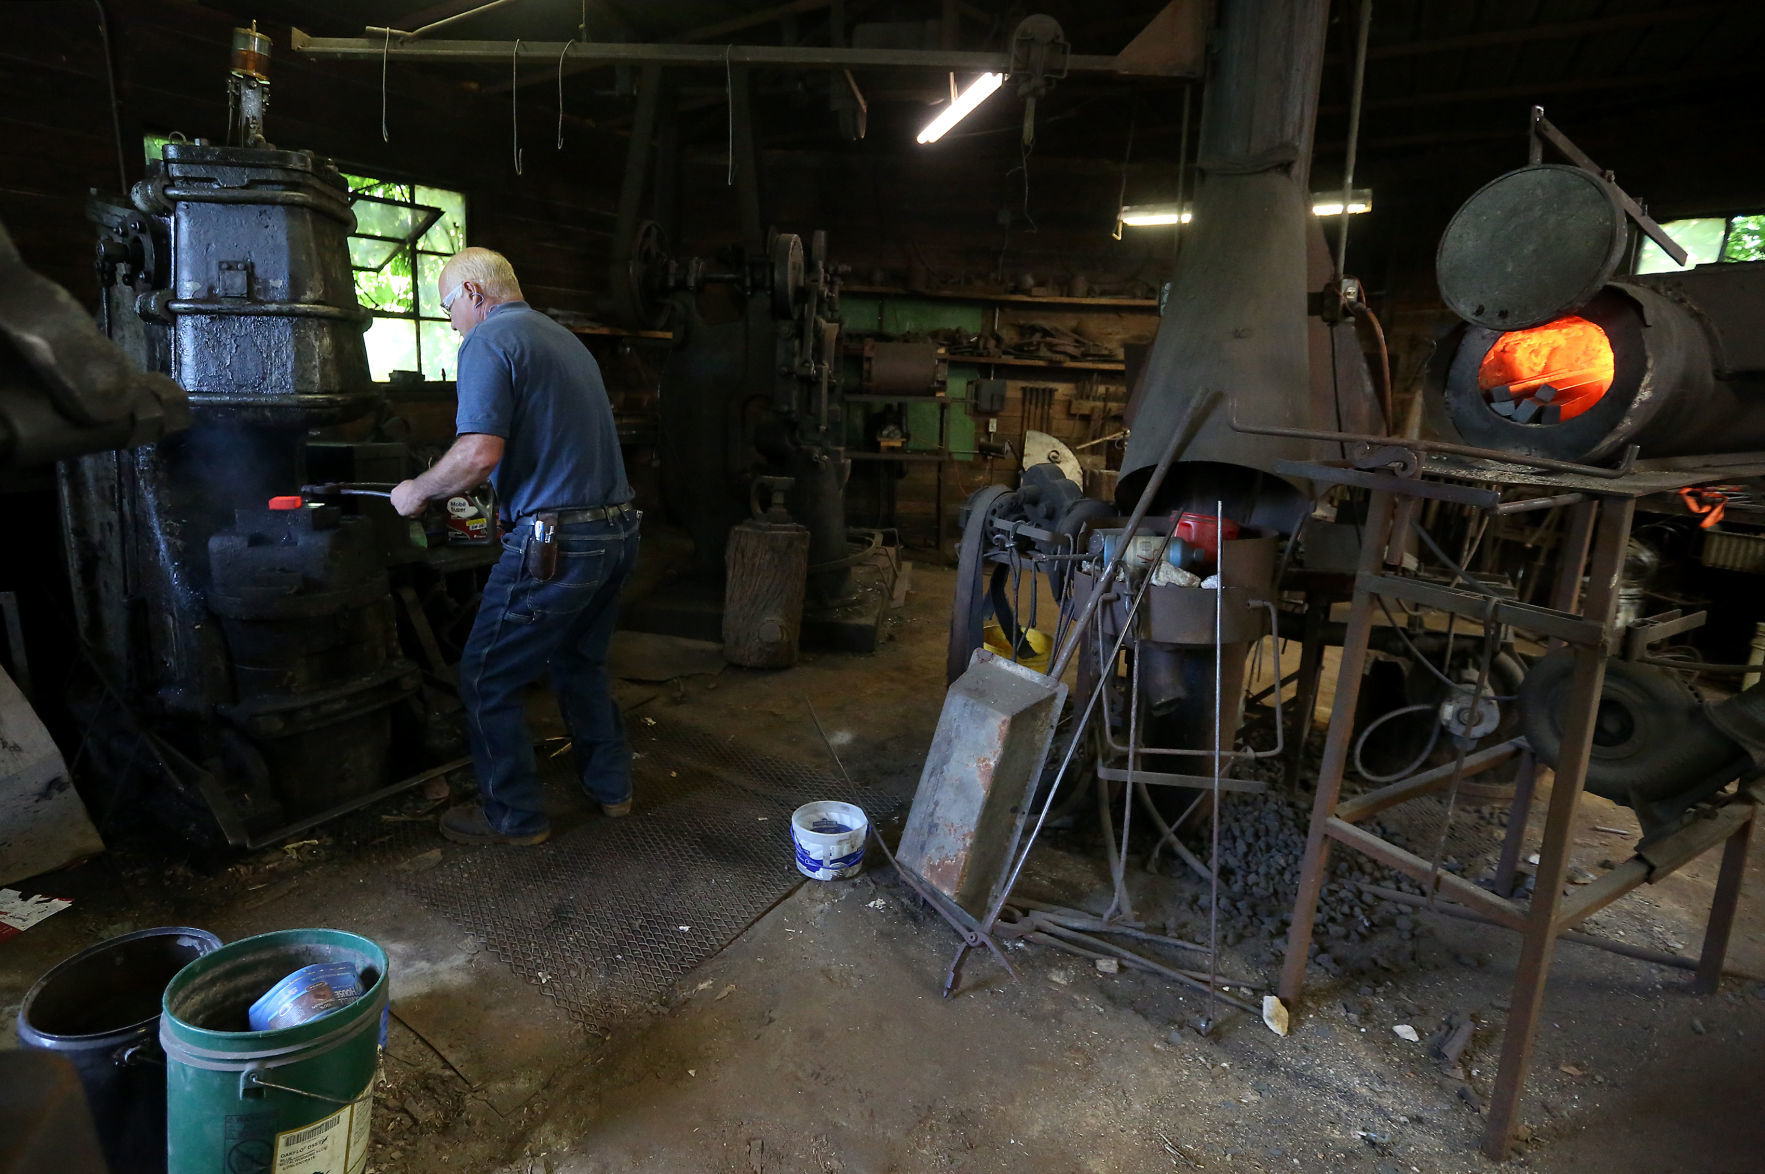 Ted Schuster works with a piece of hot metal at Prairie Forge in Hopkinton, Iowa, on Monday, July 22, 2019.    PHOTO CREDIT: JESSICA REILLY